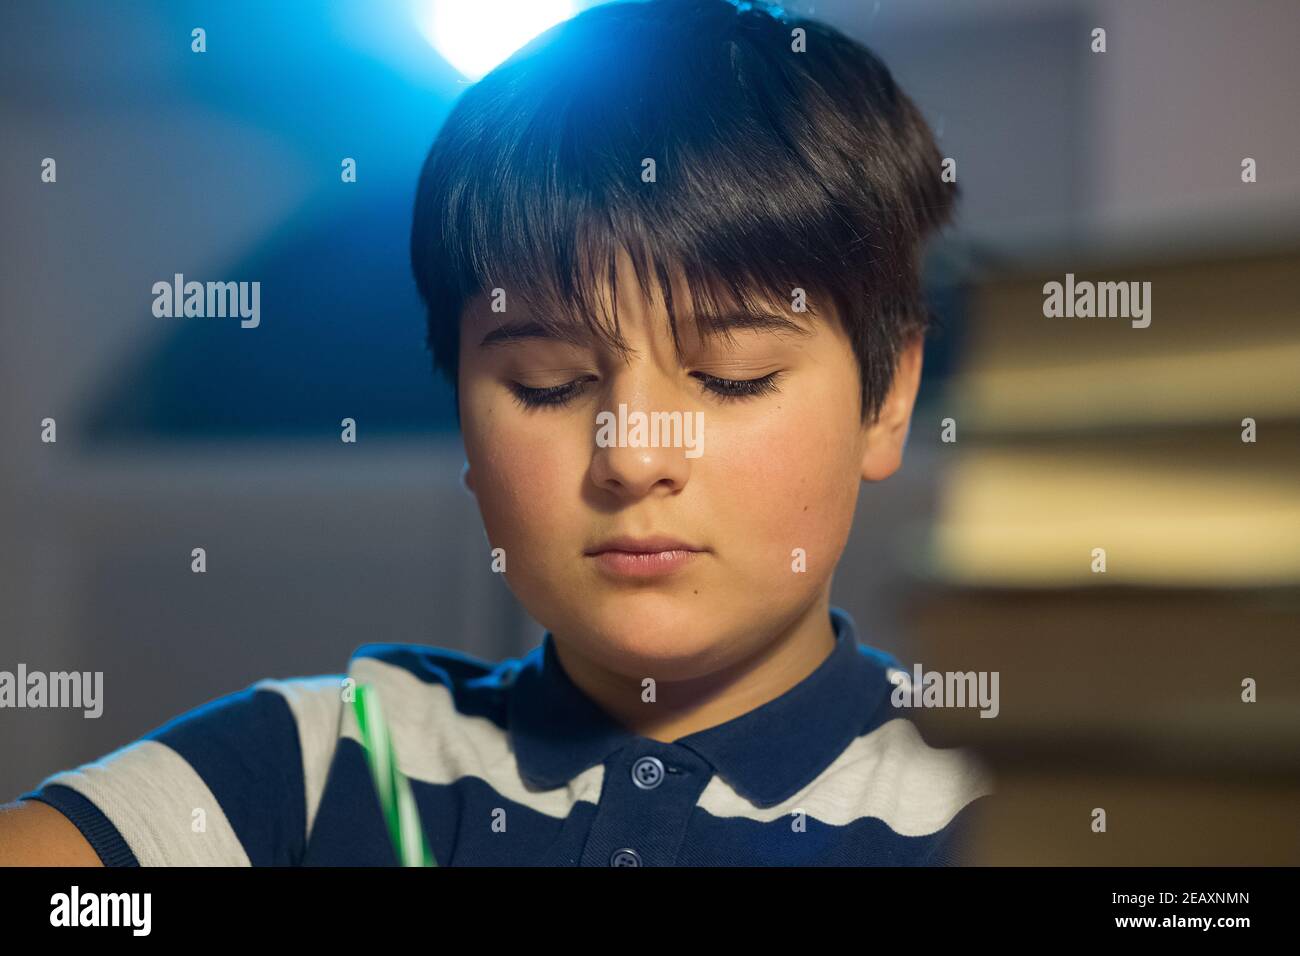 concentrated face of the child. the boy's eyes are downcast and he is busy with work. Stock Photo